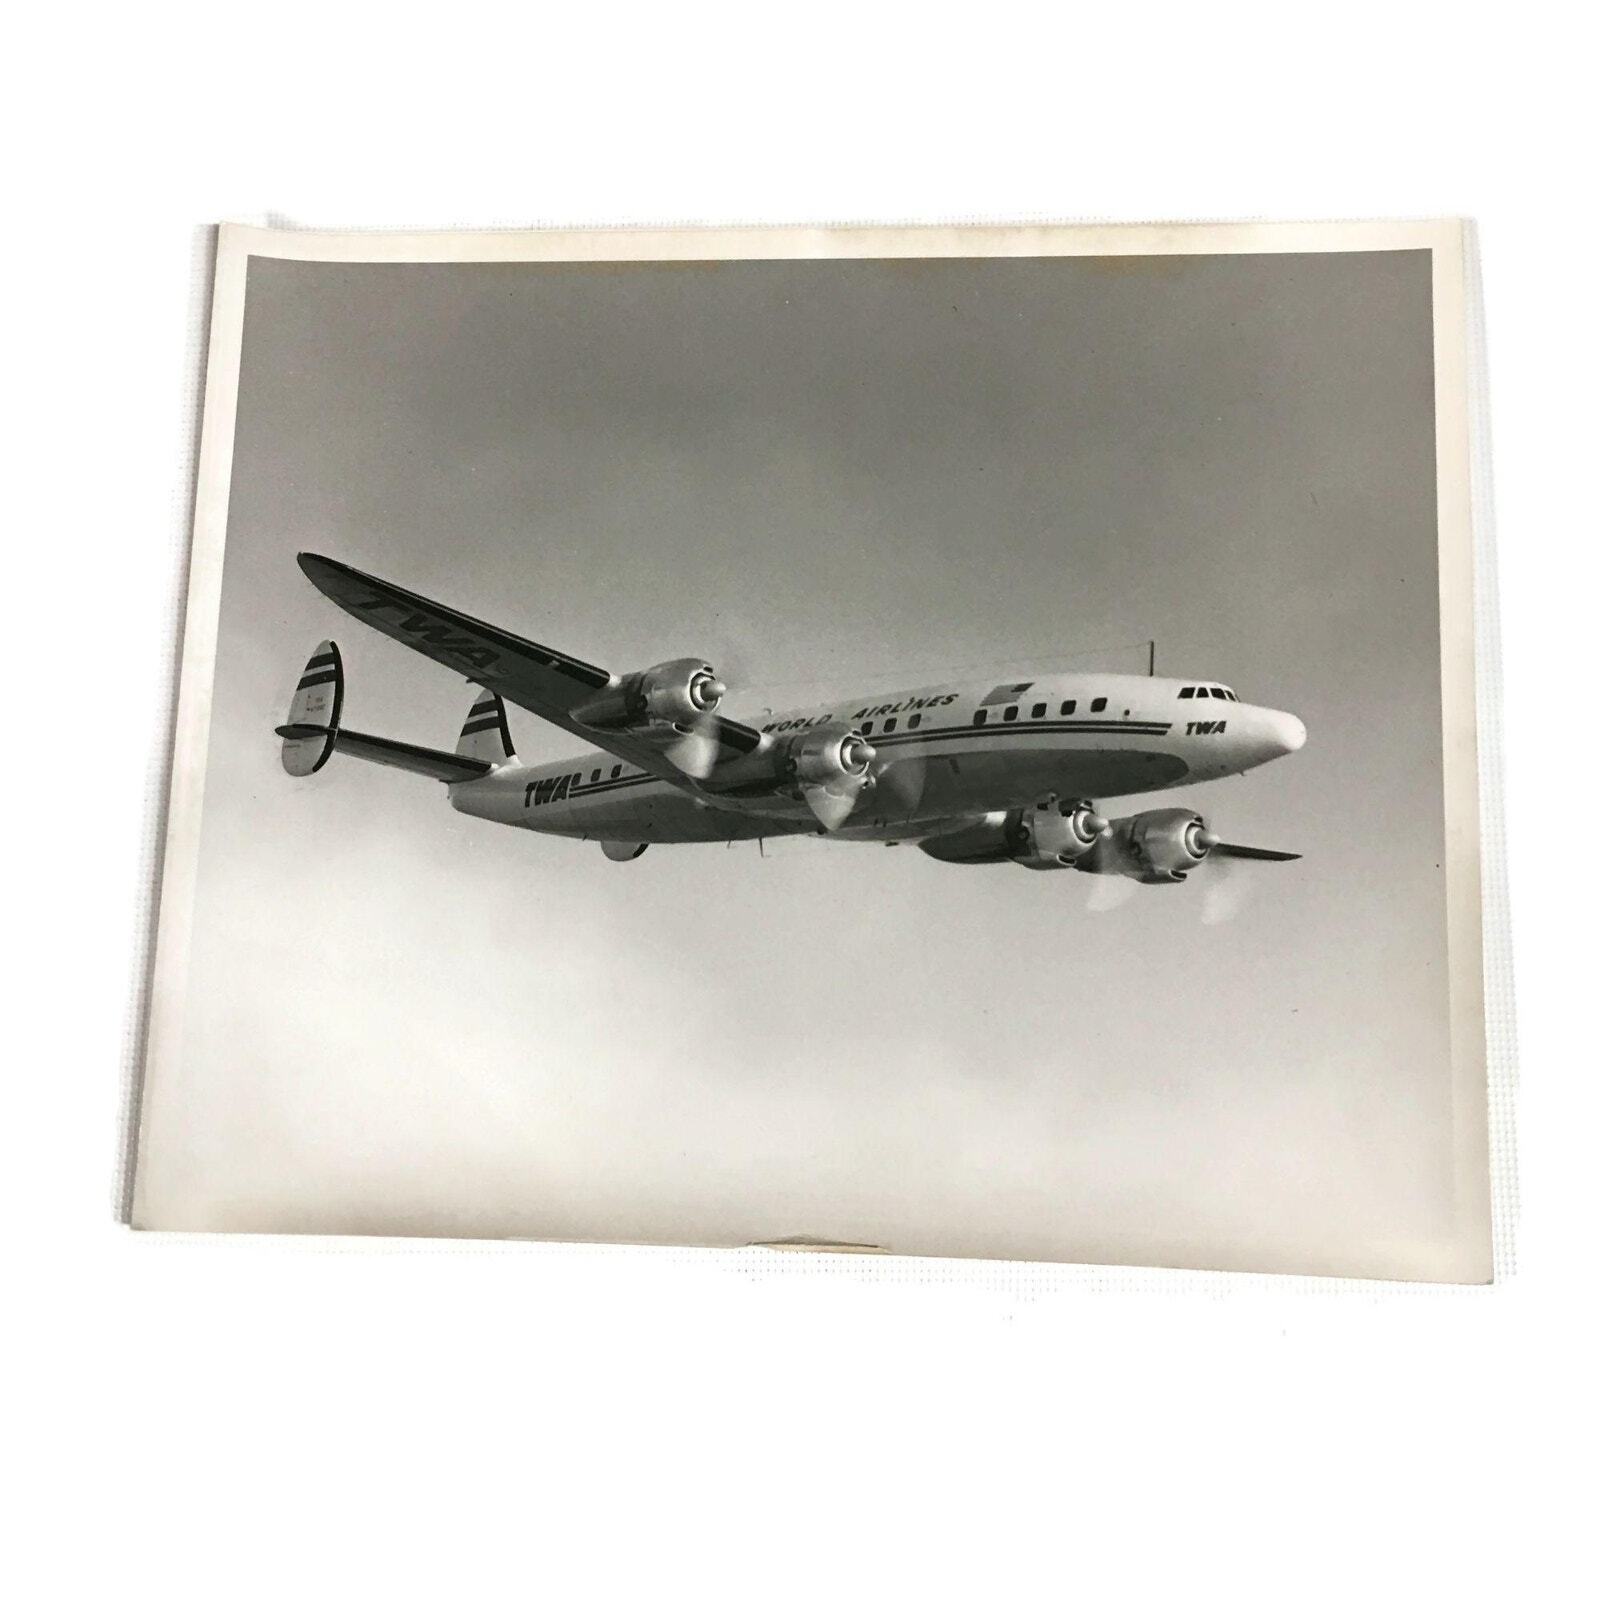 Photo TWA Press 8x10 B&W TRANS WORLD AIRLINES 4 propellers air view from side